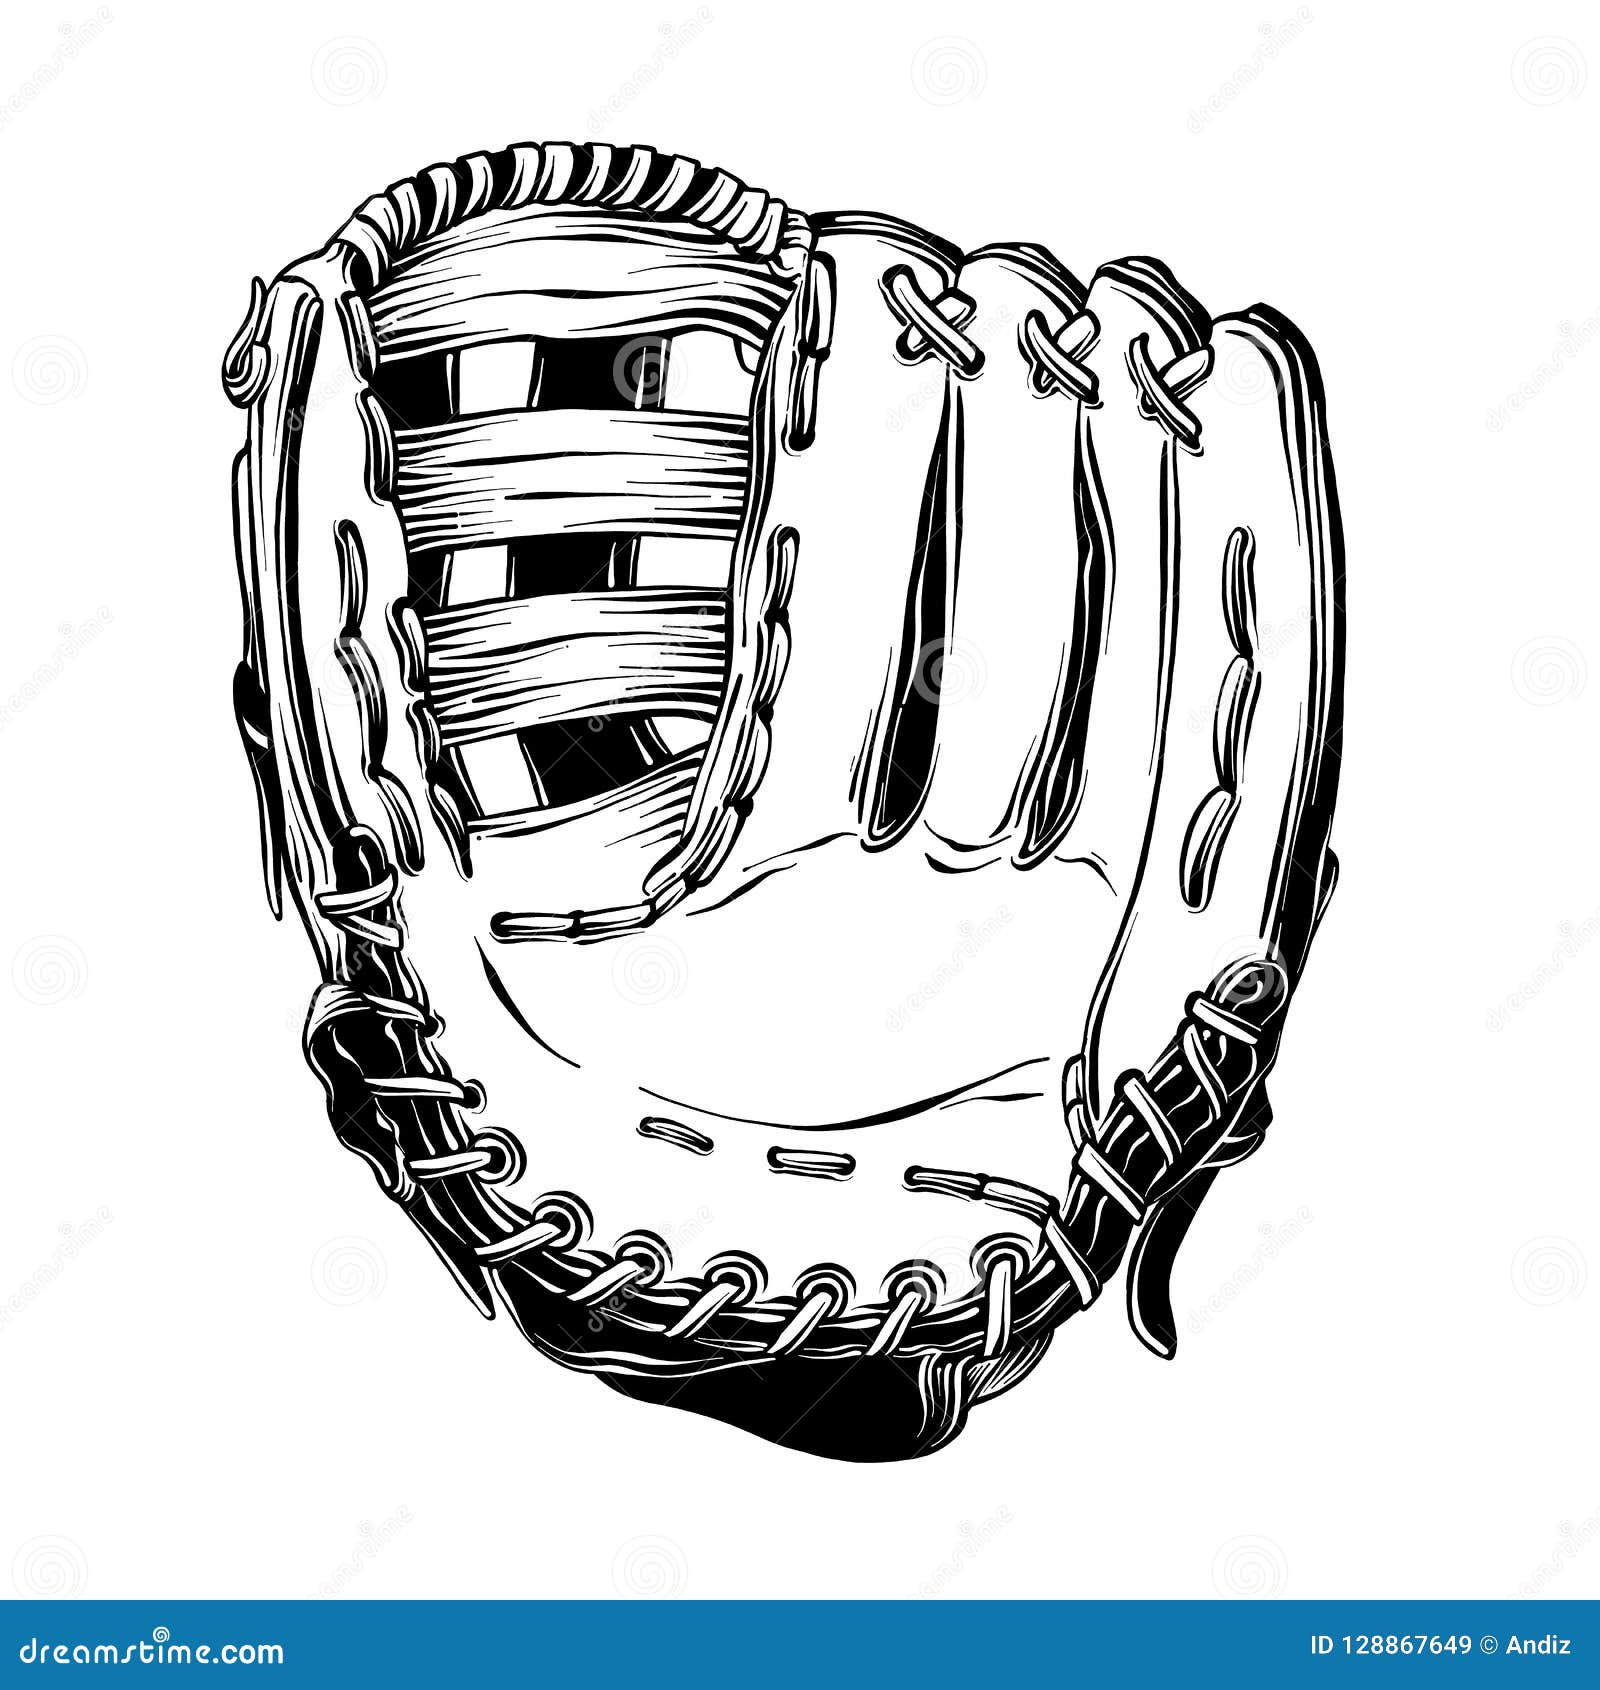 Protective Gloves Drawing High-Res Vector Graphic - Getty Images